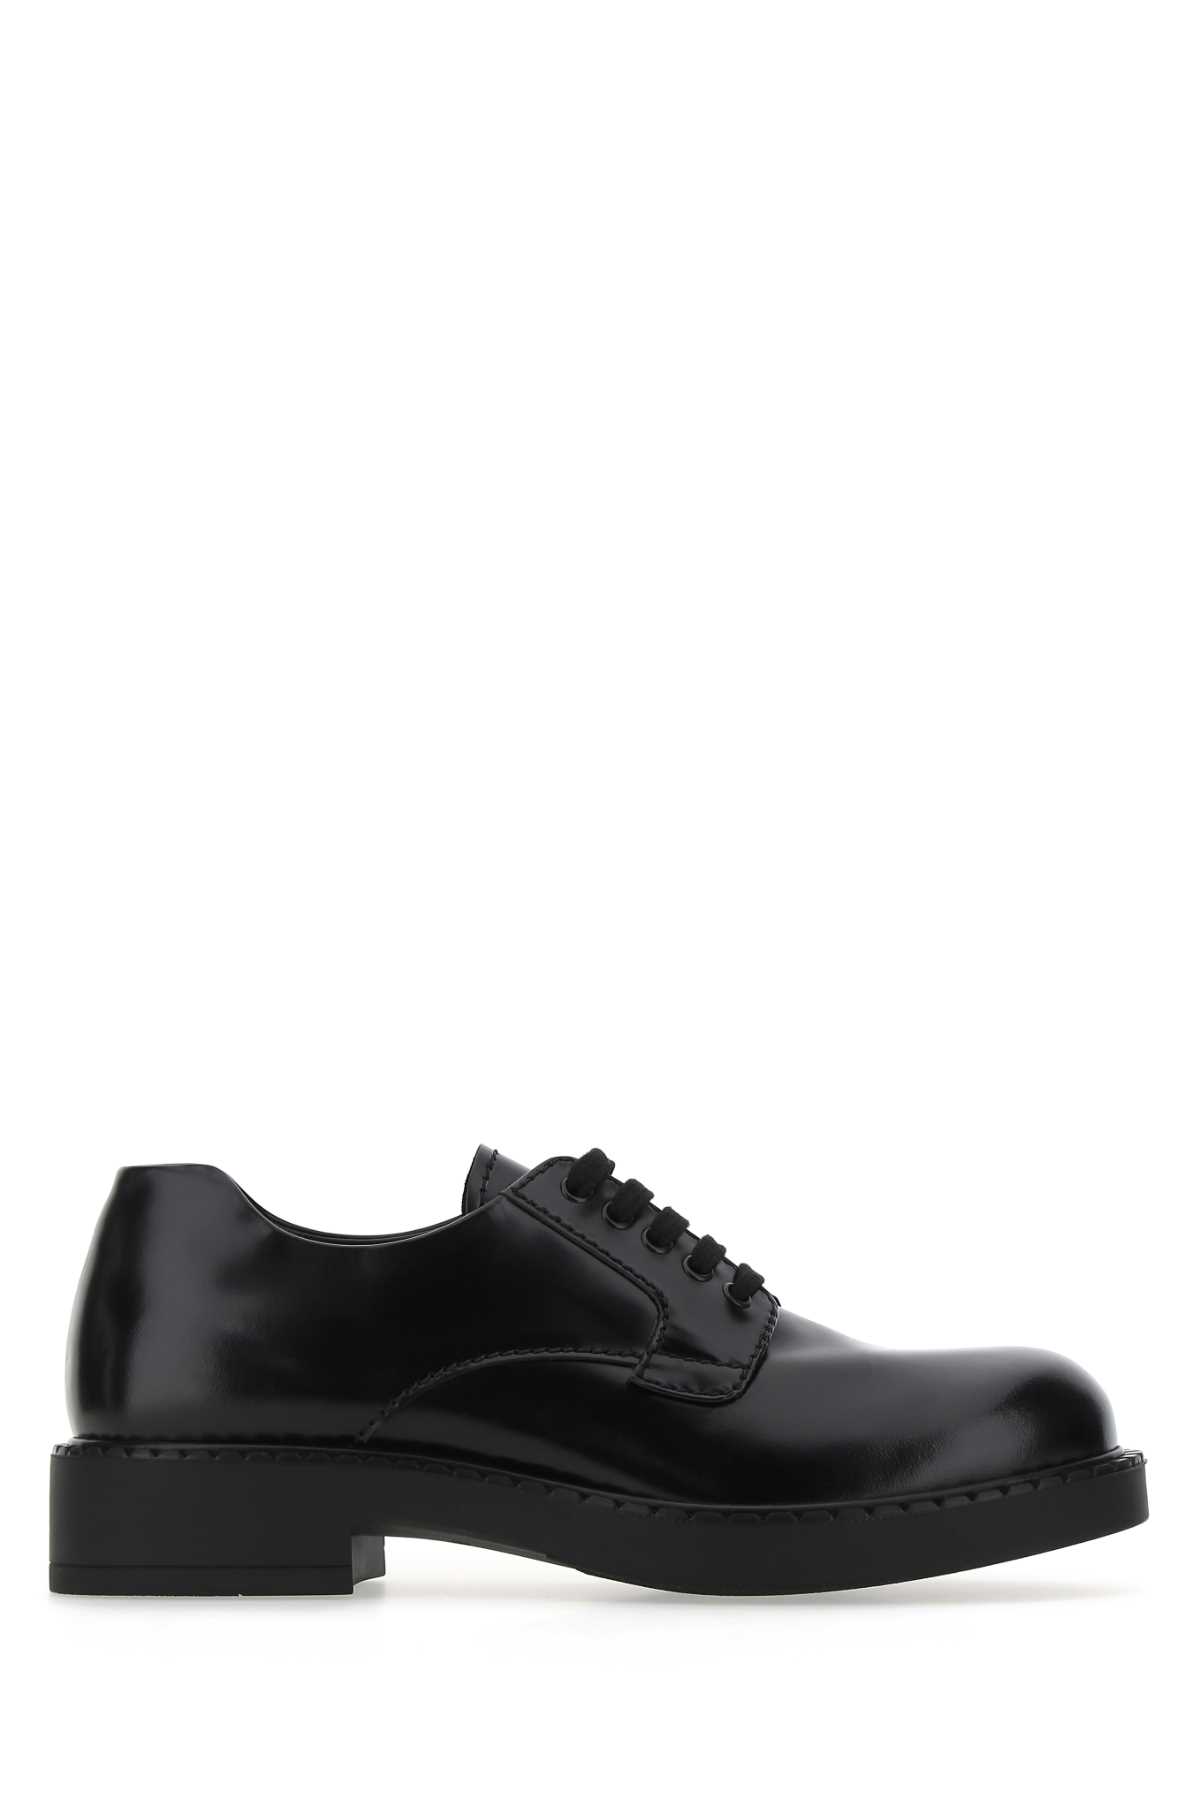 Shop Prada Black Leather Lace-up Shoes In F0002